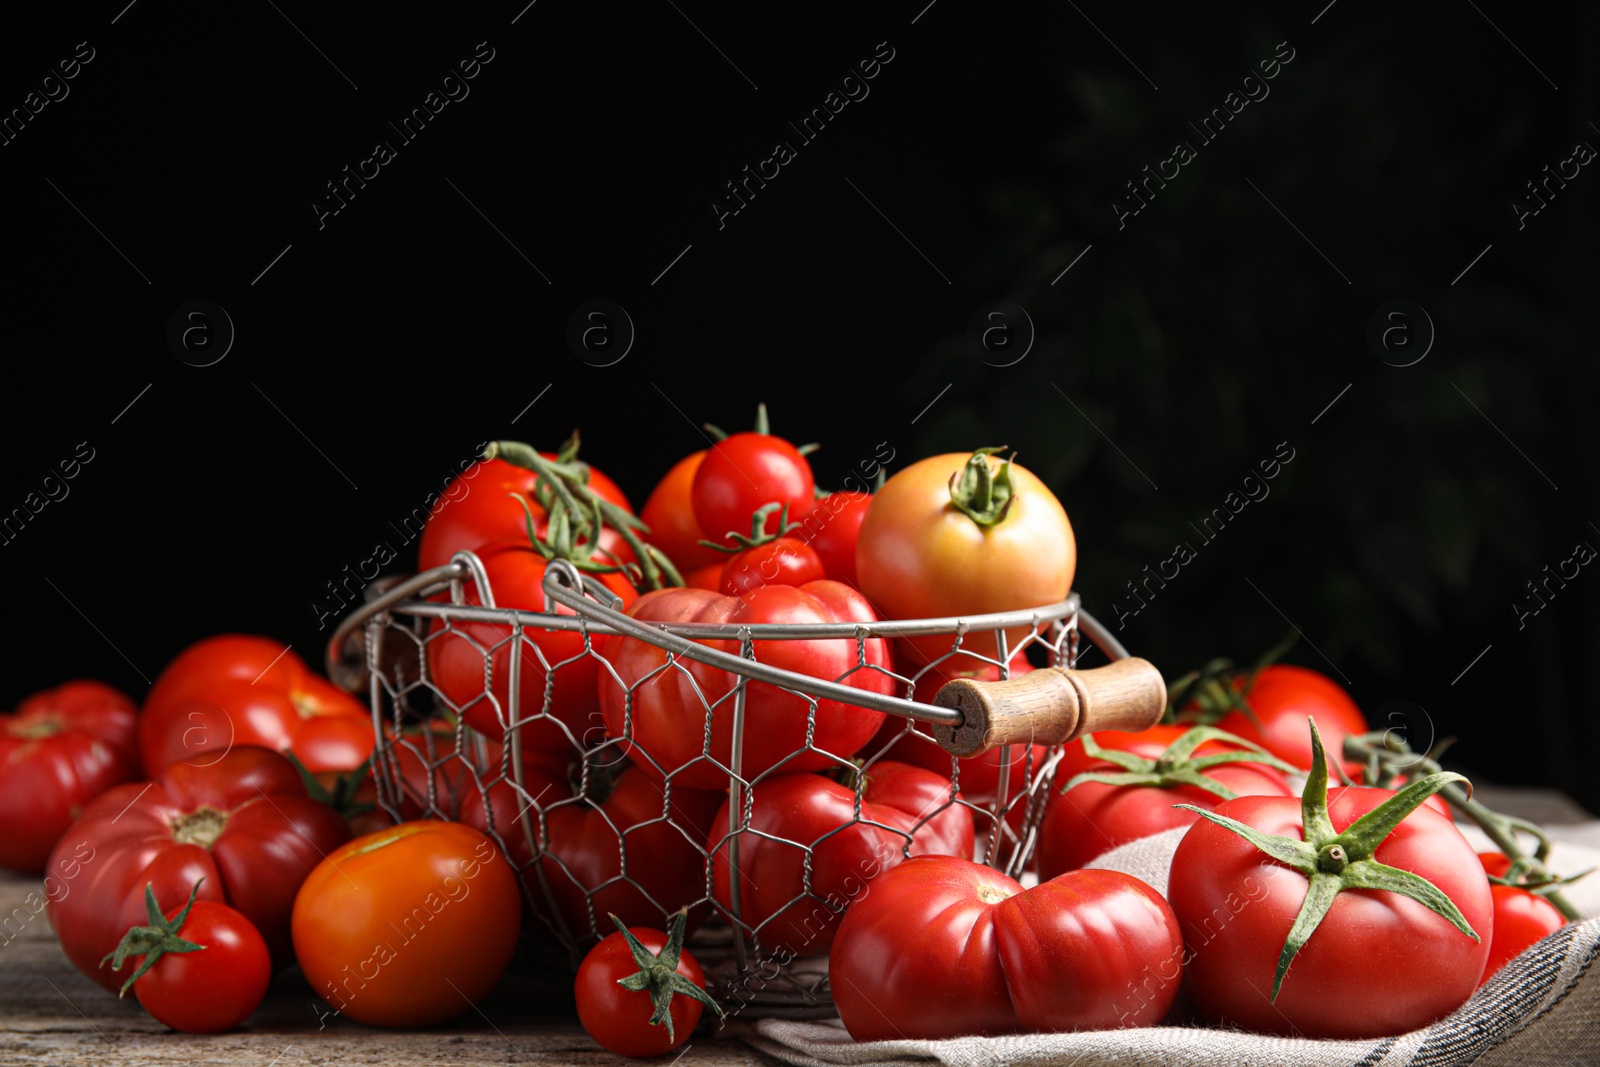 Photo of Many different ripe tomatoes on wooden table against dark background